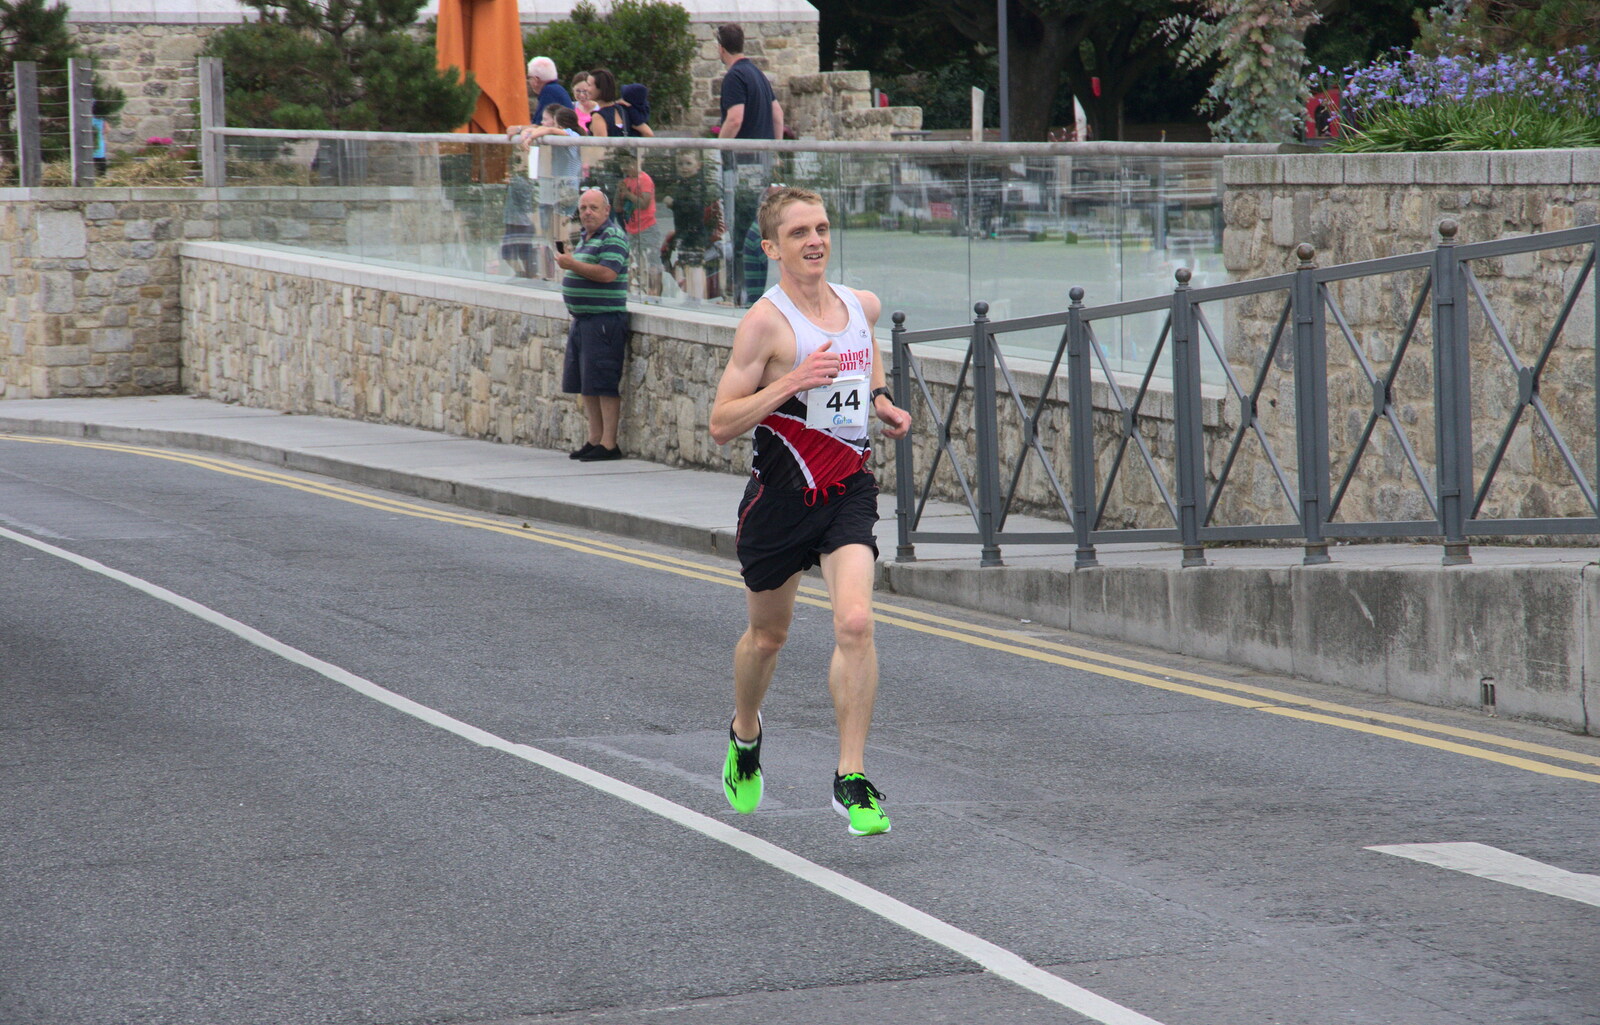 The race leader runs past at around the 30 minute mark from The Dún Laoghaire 10k Run, County Dublin, Ireland - 6th August 2018